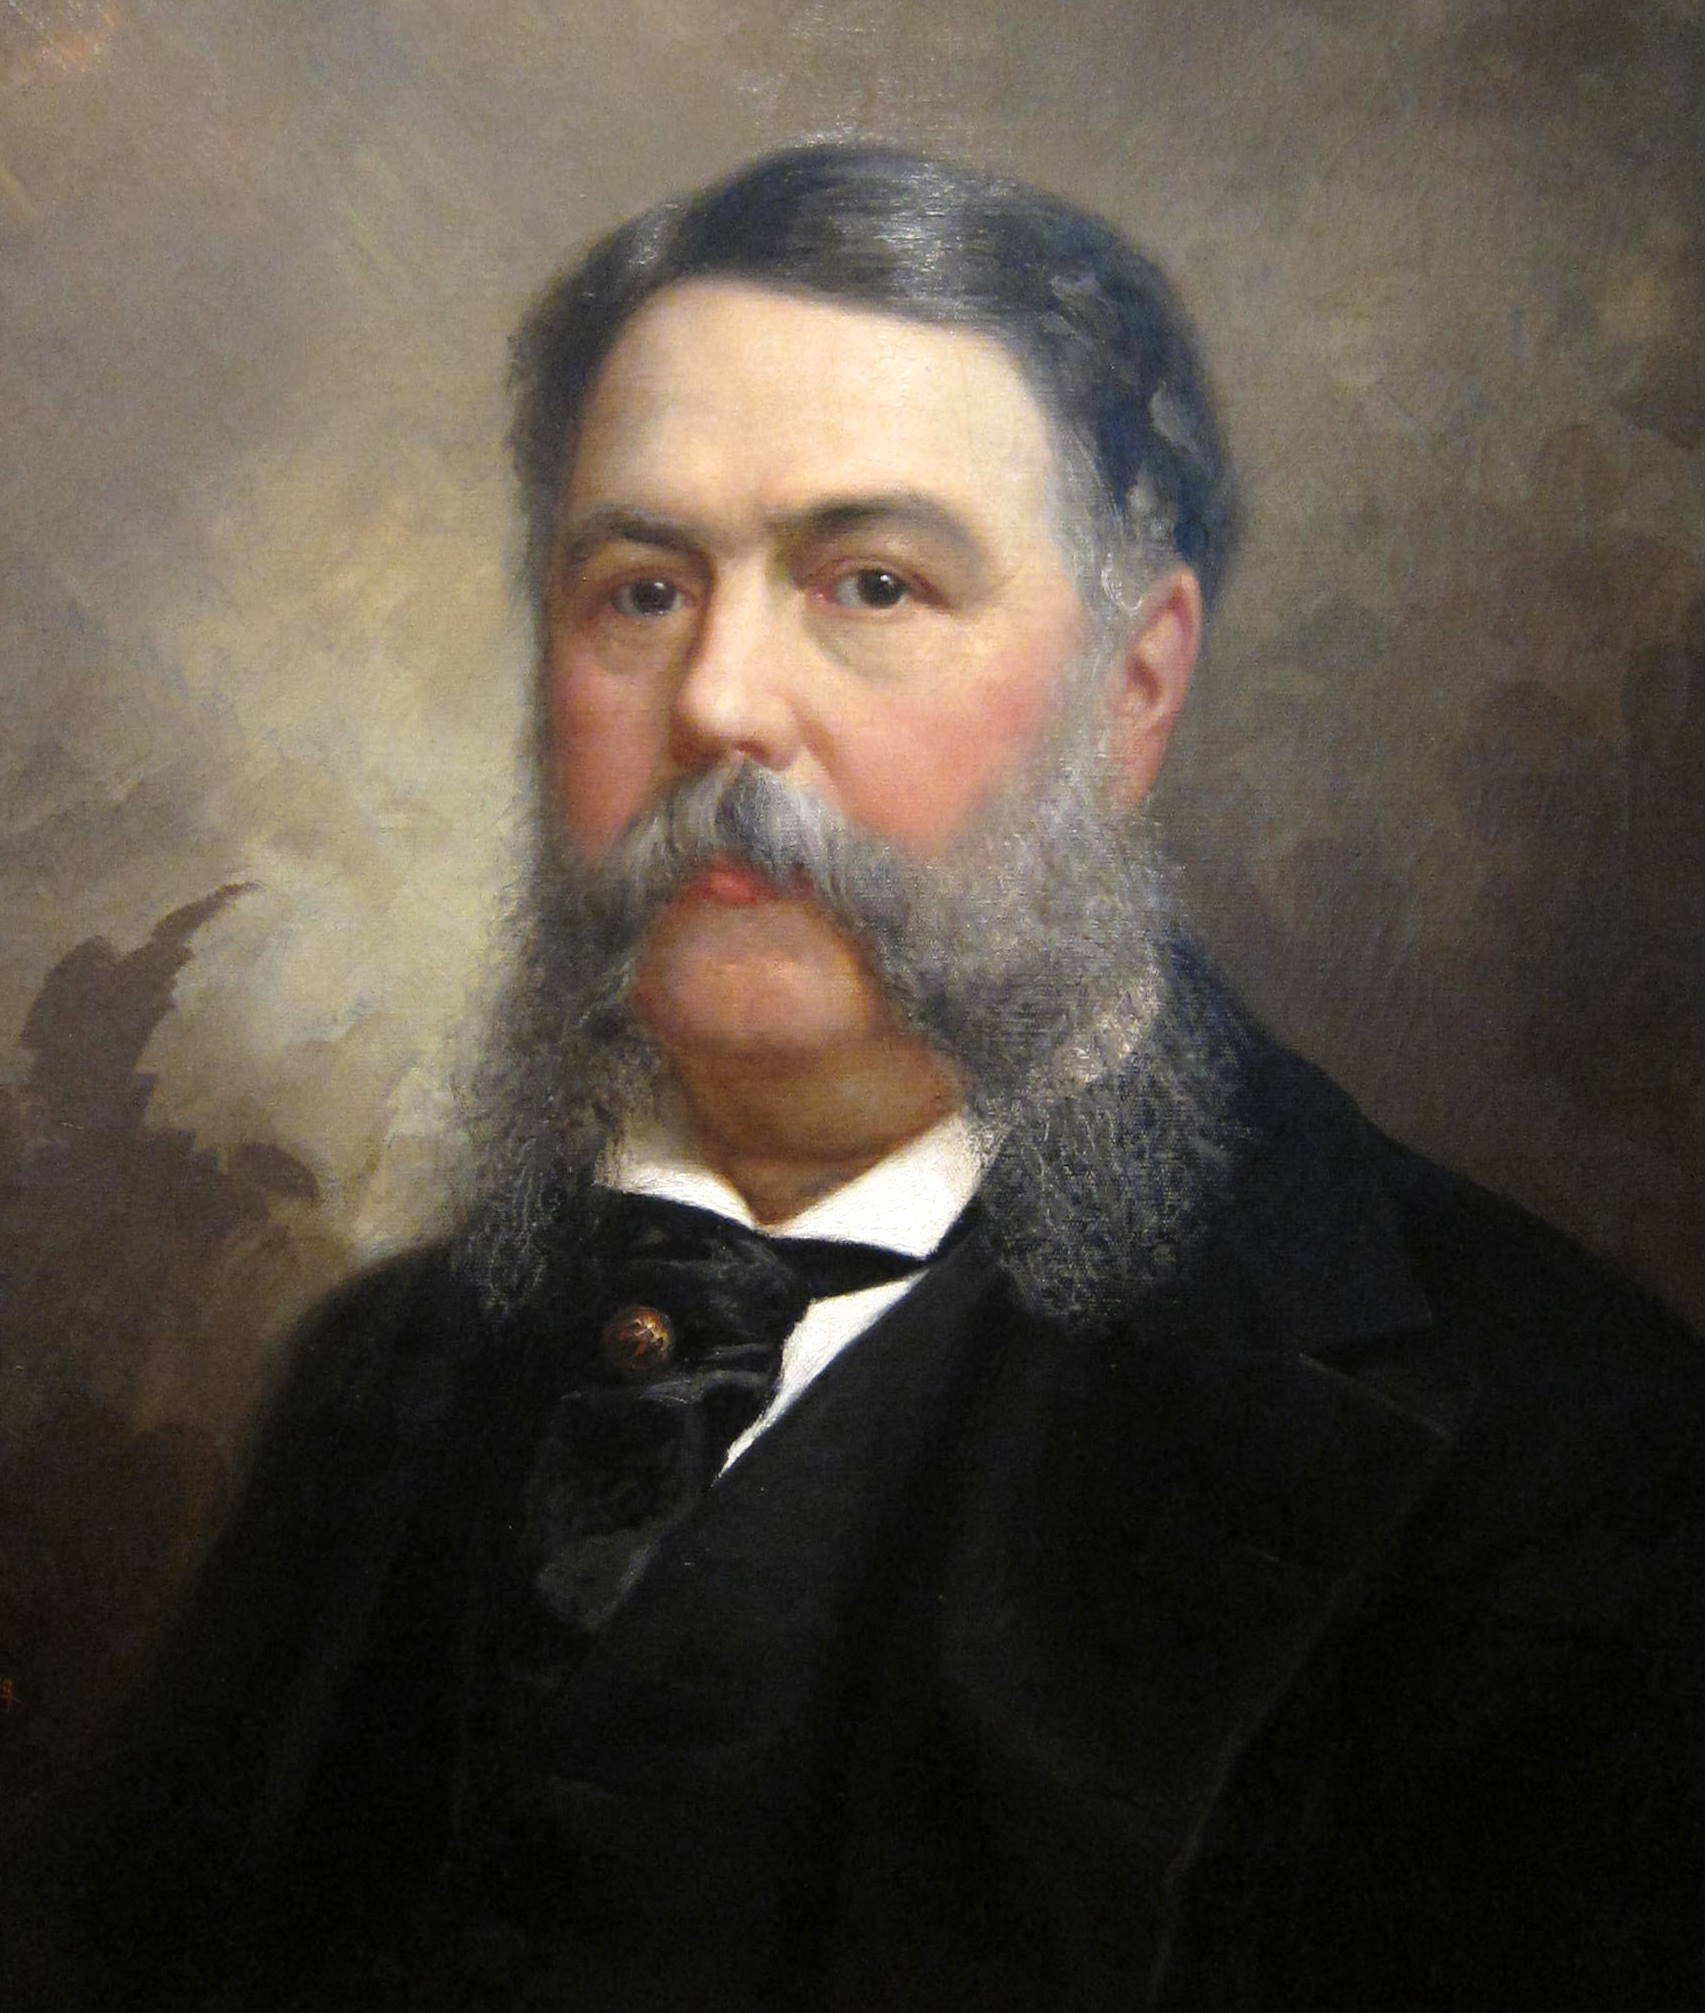 Chester A. Arthur is inaugurated as the 21st President of the United States following the assassination of James Garfield